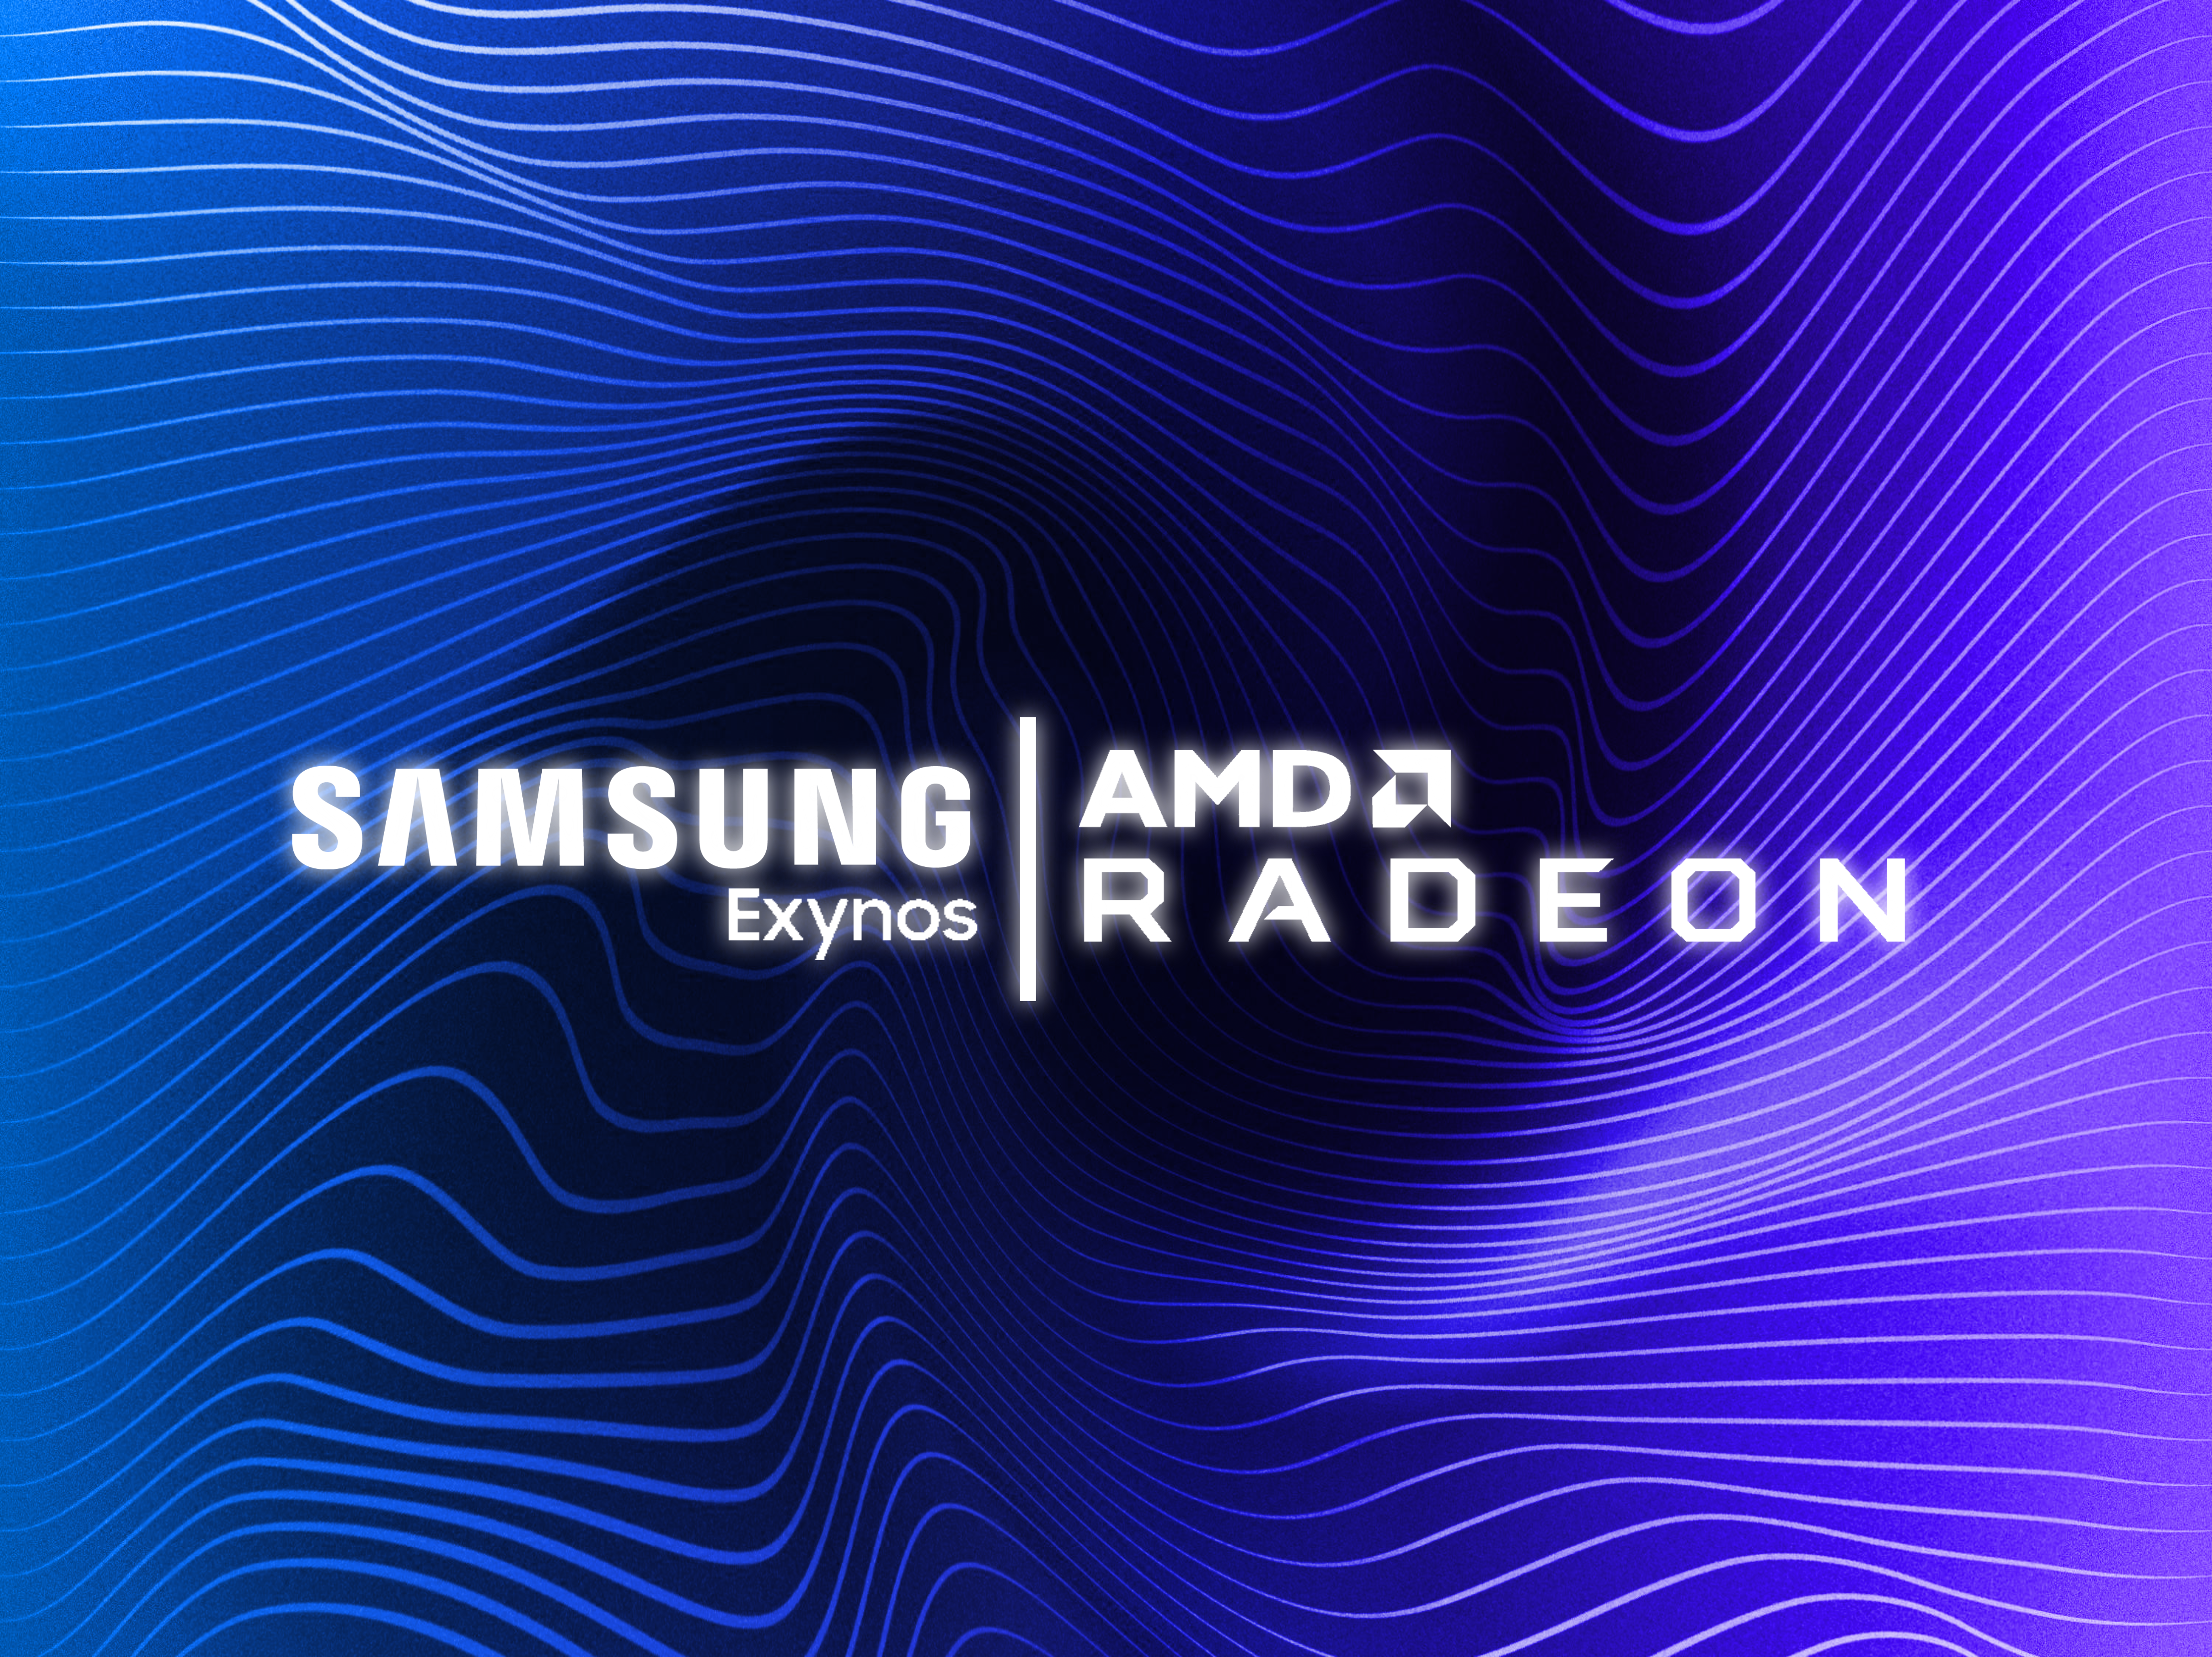 ARMs Race | Samsung Exynos + AMD Radeon SOC to use RDNA 2 and support ray tracing